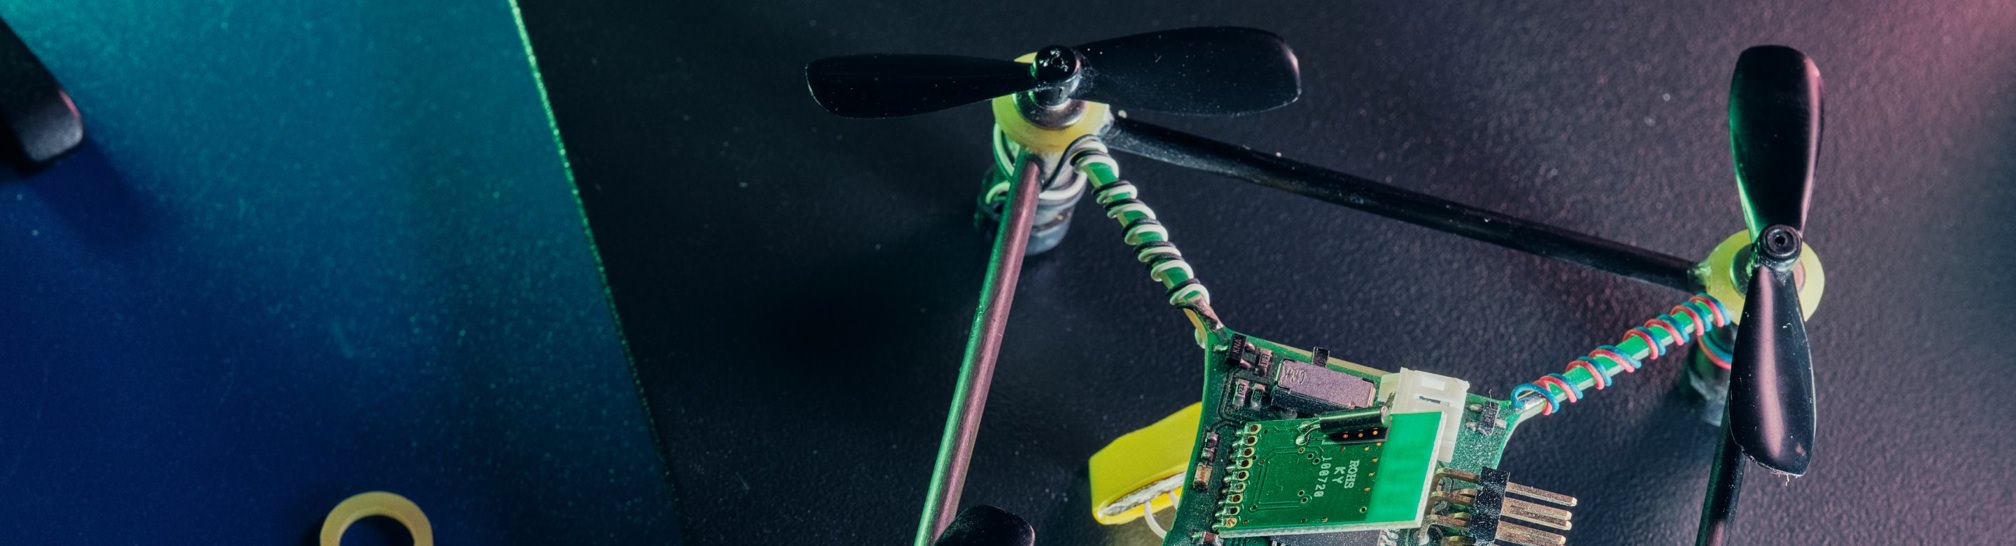 A small drone that can be controlled over a wireless gamepad developed by Integra Sources